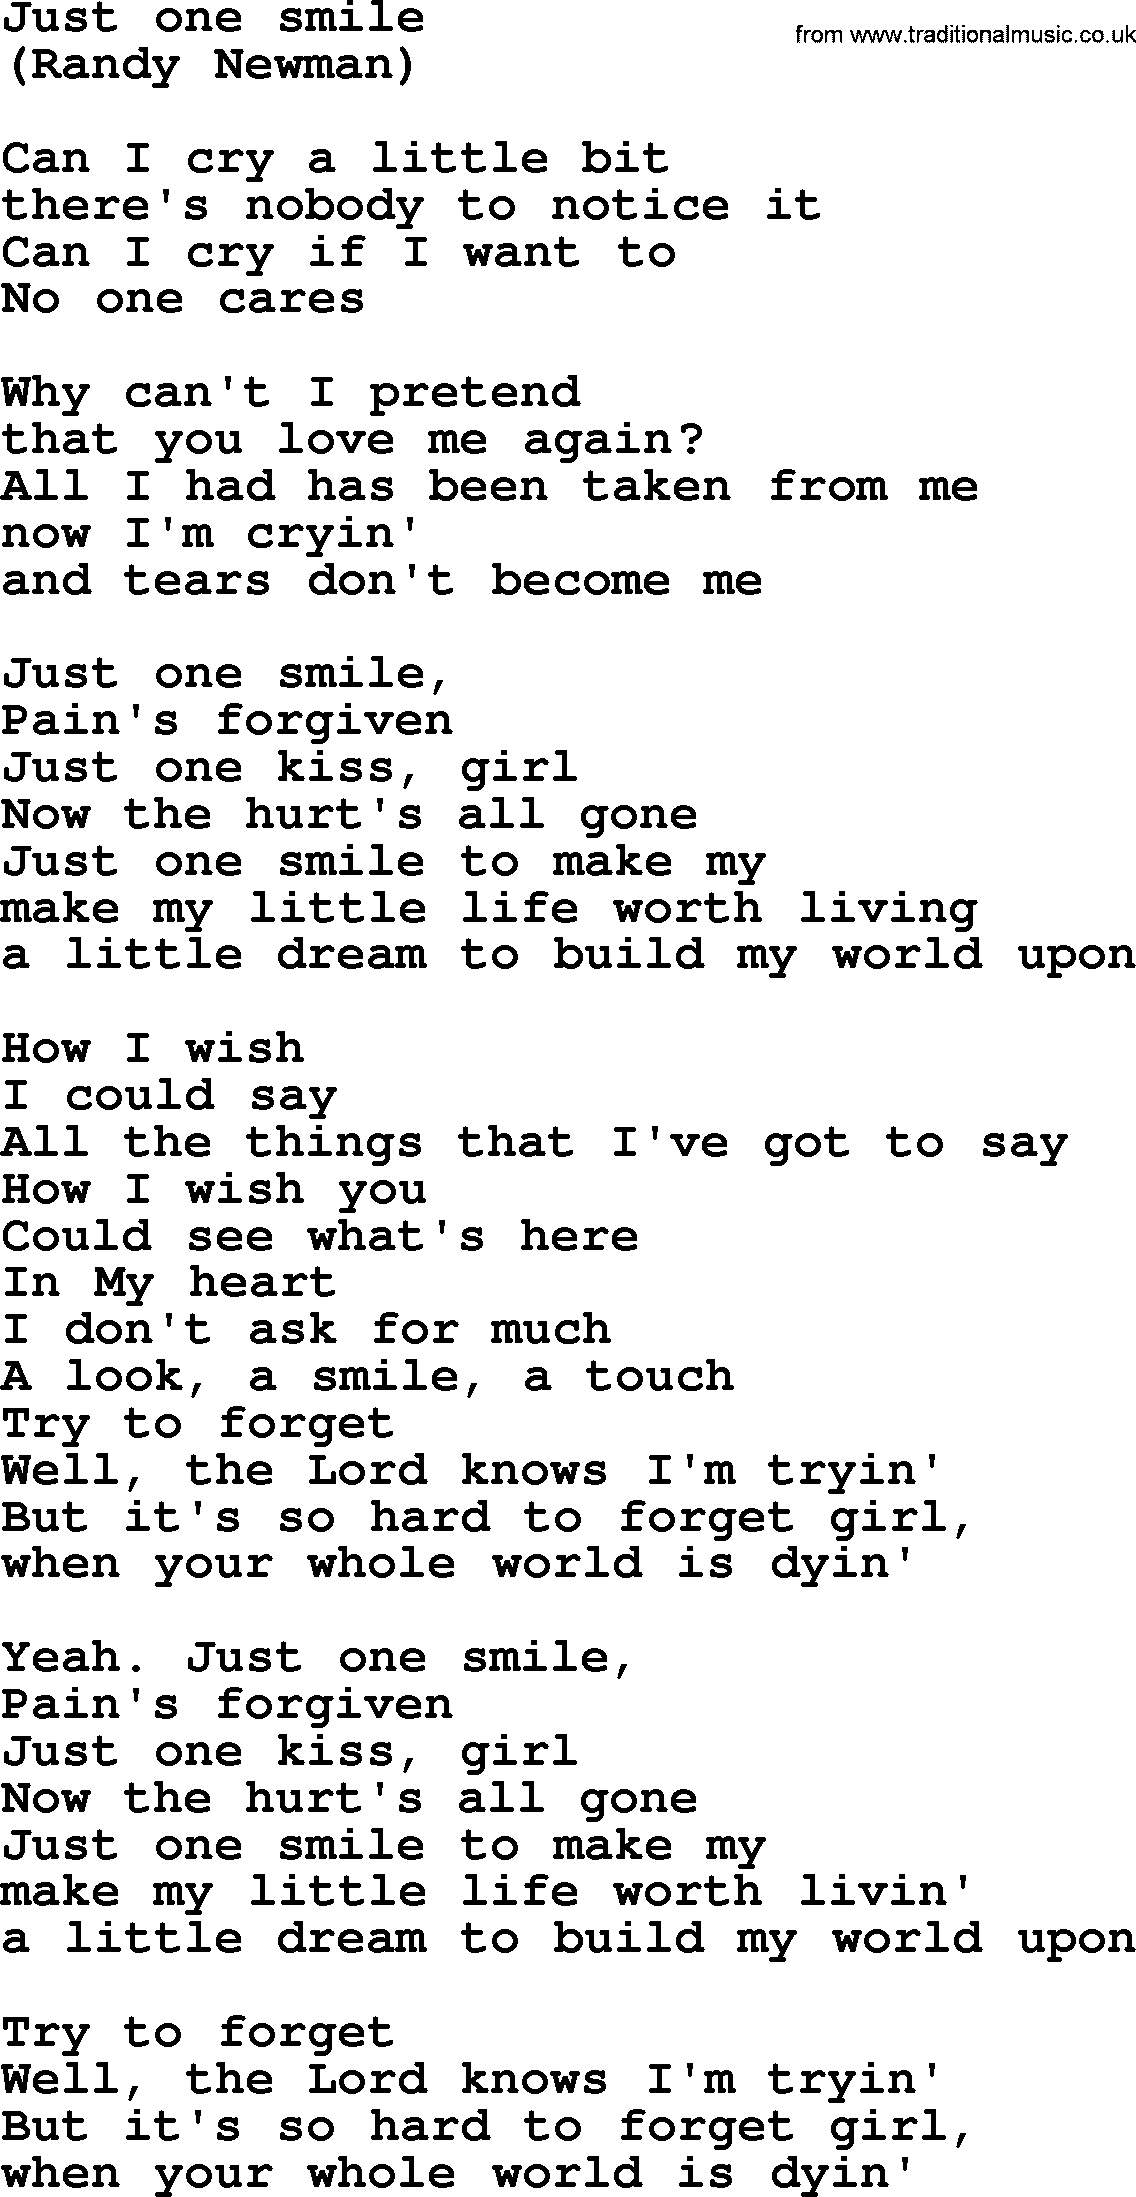 The Byrds song Just One Smile, lyrics